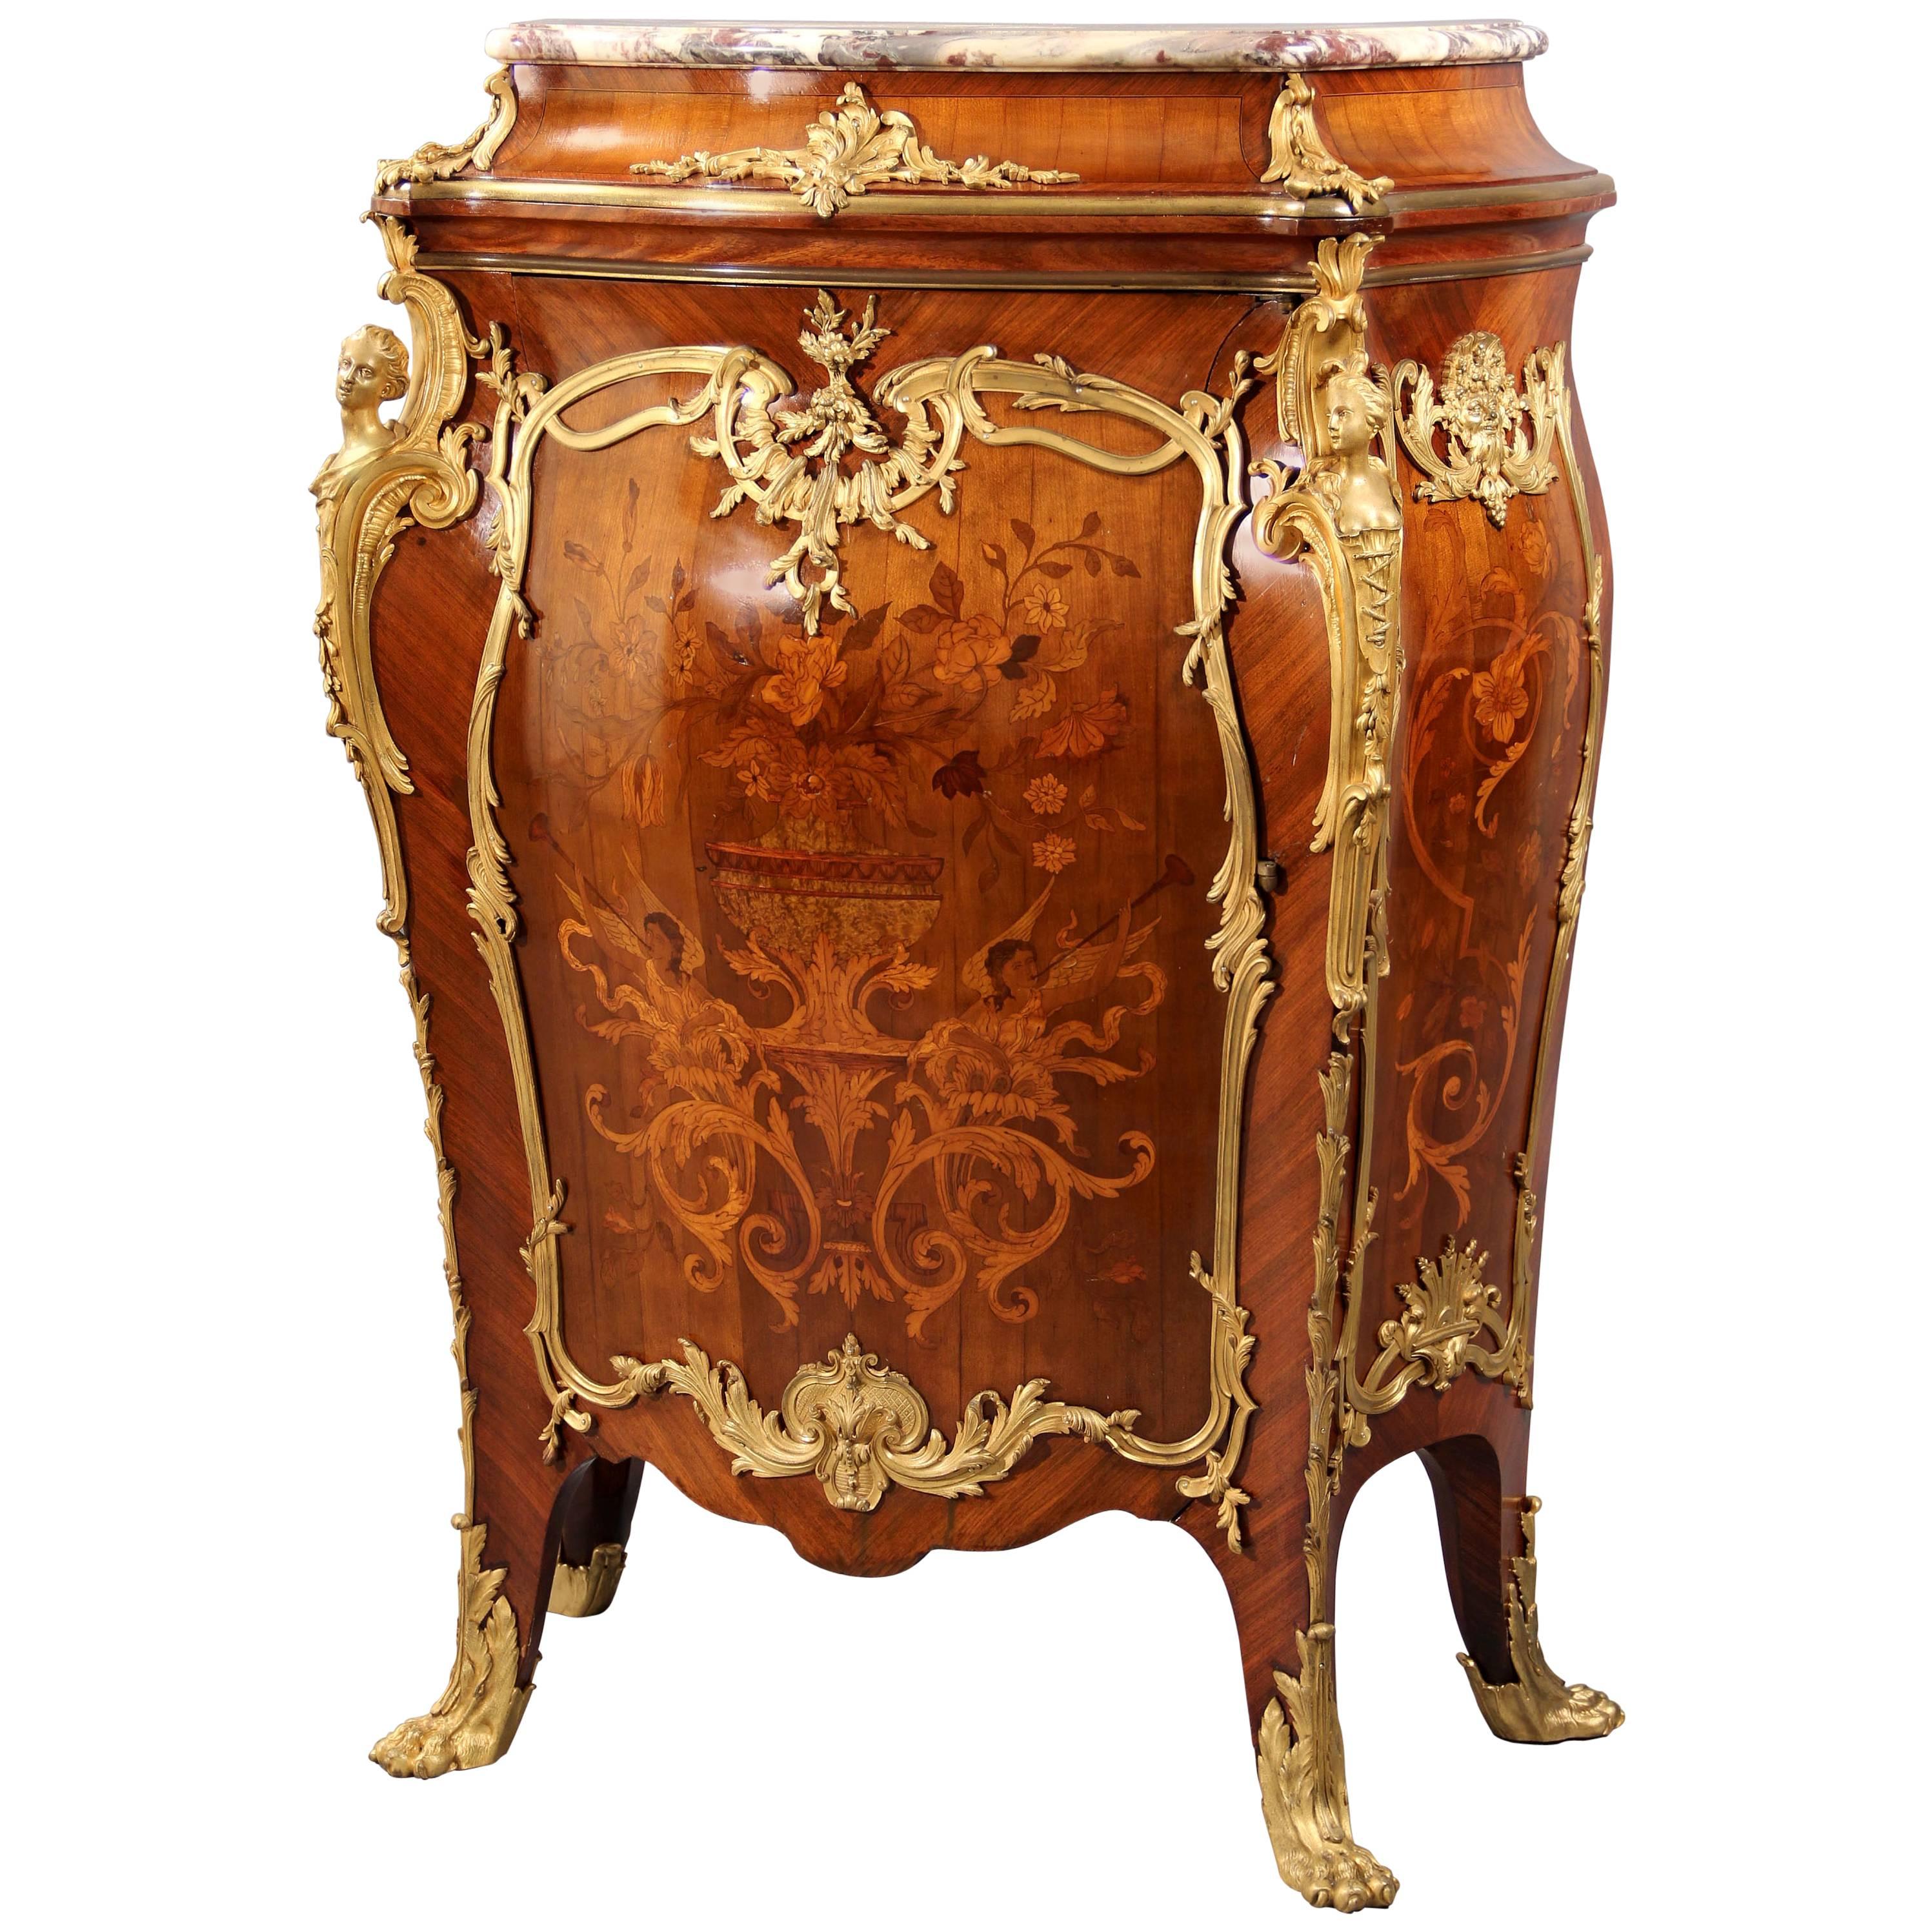  Rare Late 19th Century Gilt Bronze Mounted Cabinet by François Linke